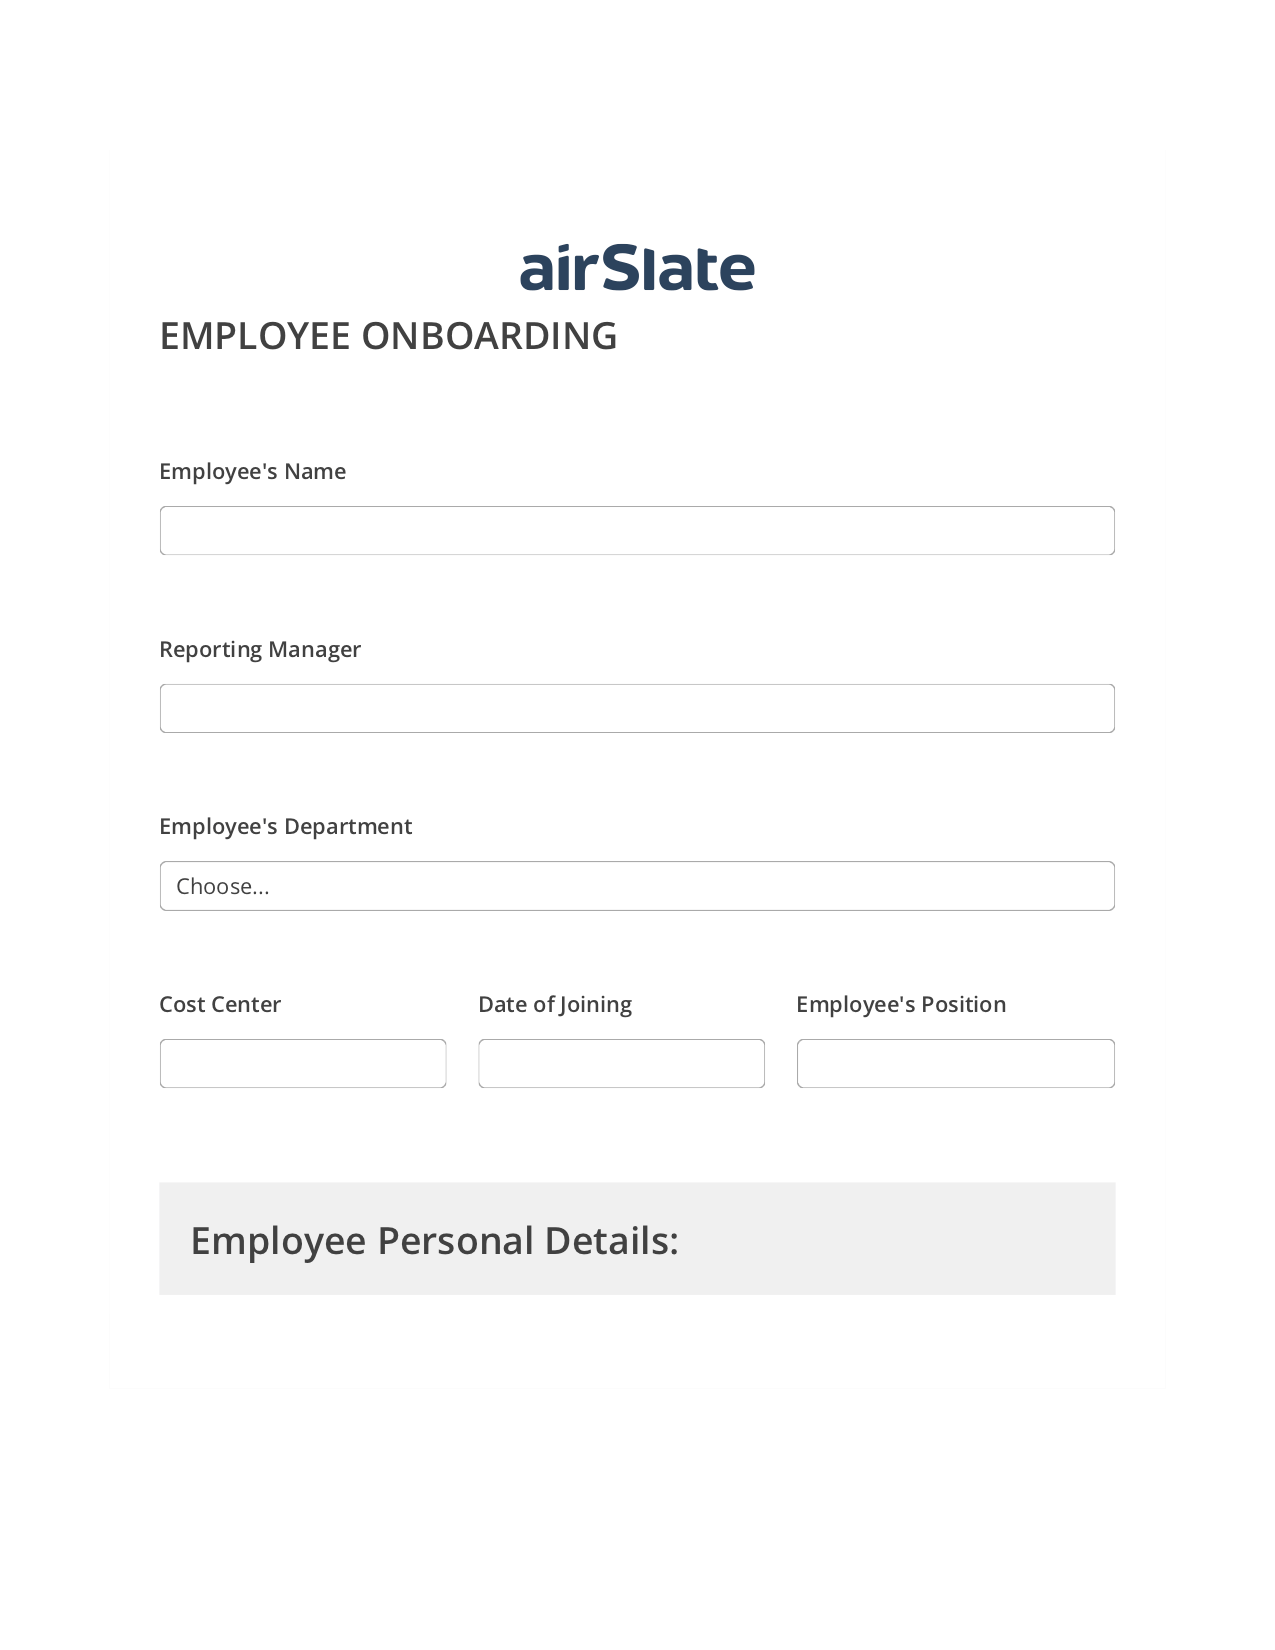 Employee Onboarding Workflow Pre-fill from MySQL Dropdown Options Bot, Create QuickBooks Invoice Bot, Export to NetSuite Bot